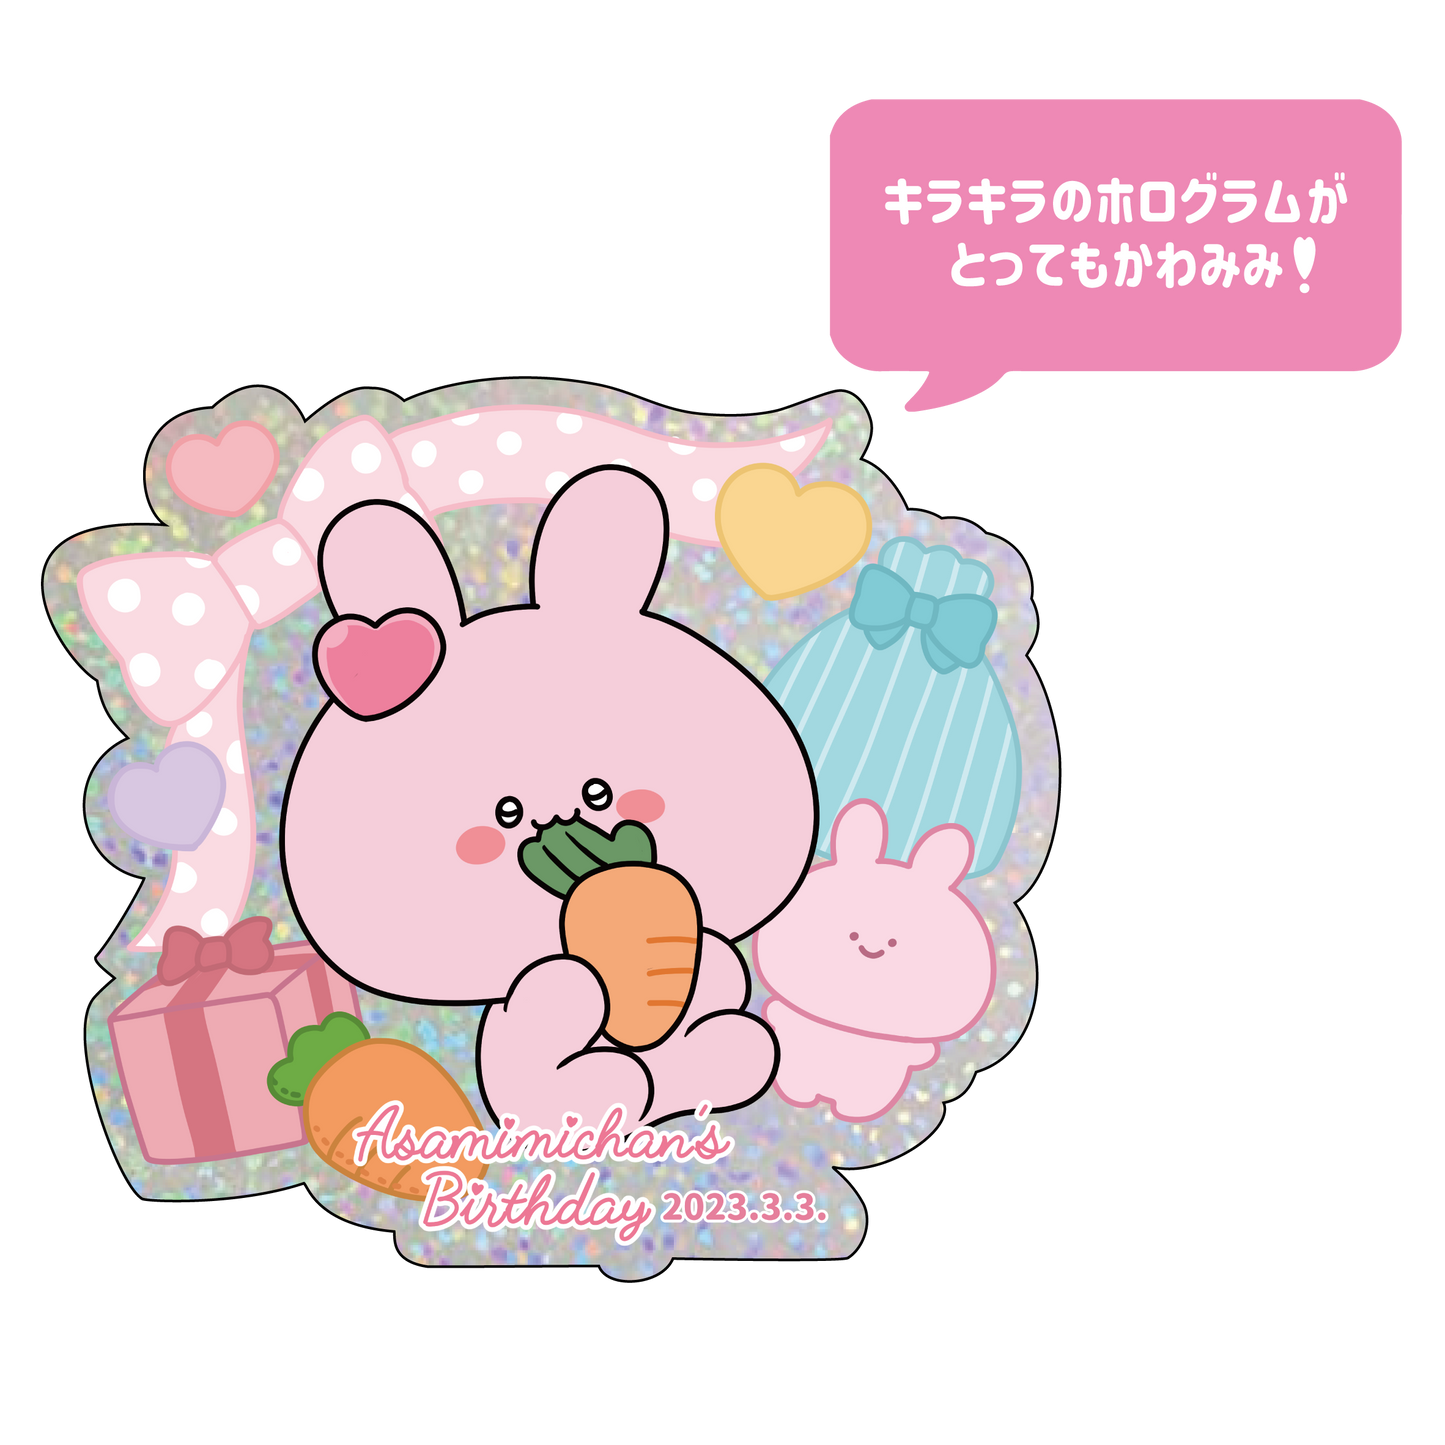 [Asamimi-chan] Asamimi Birthday (Super recommended set) [Shipped in early April]